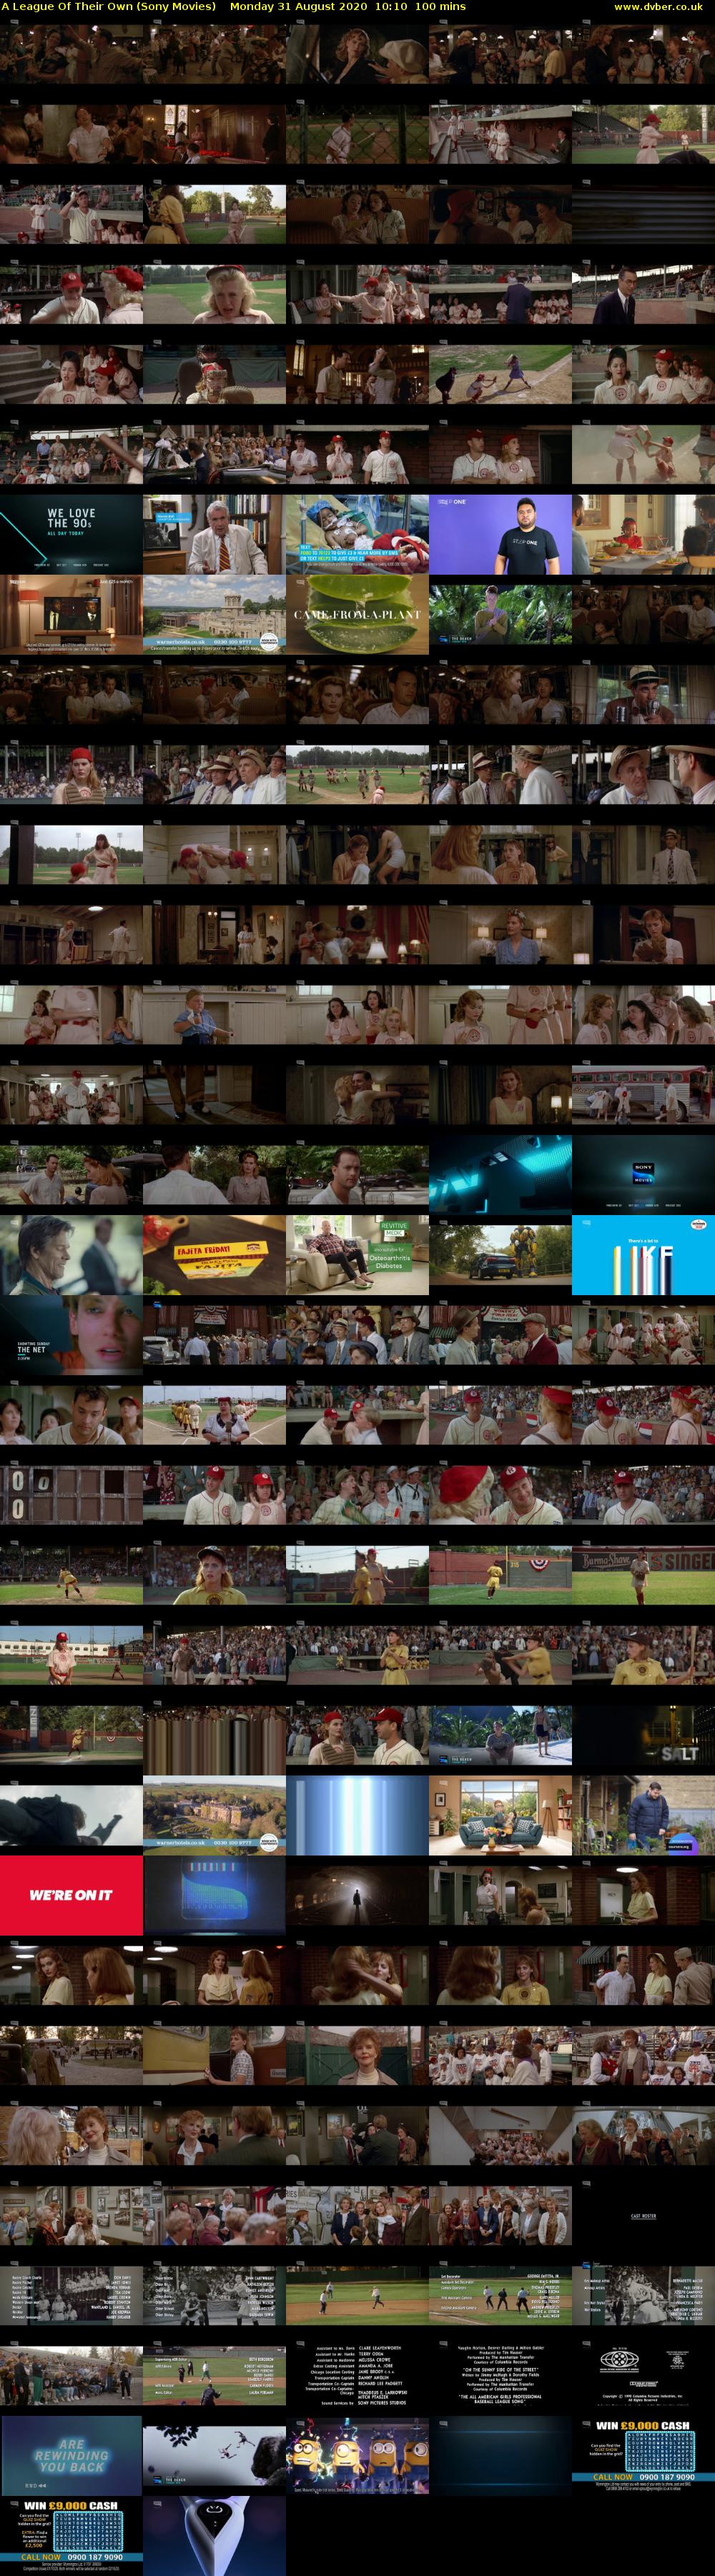 A League Of Their Own (Sony Movies) Monday 31 August 2020 10:10 - 11:50